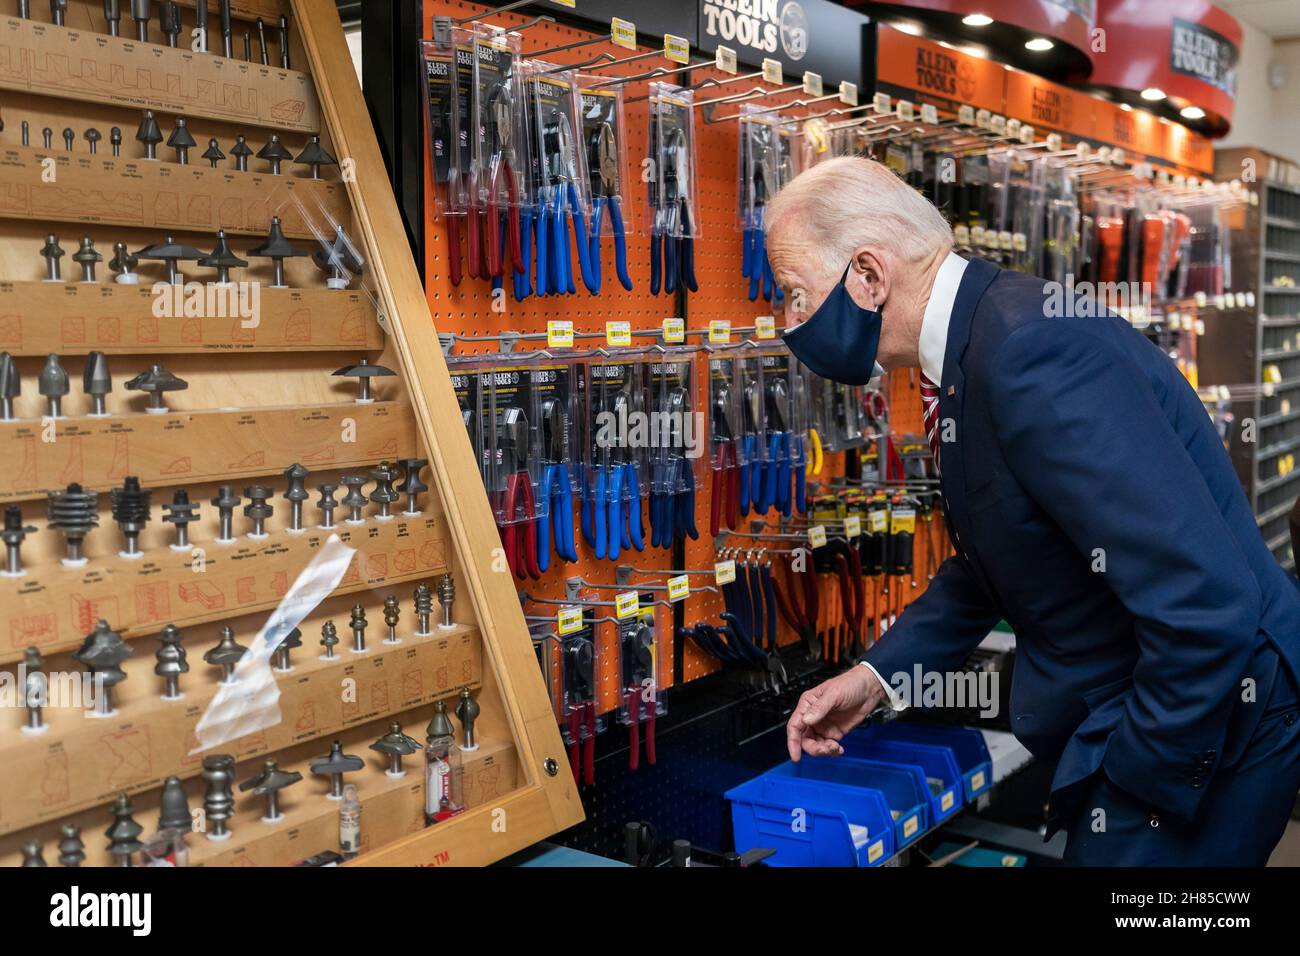 Nantucket, United States Of America. 26th Nov, 2021. Nantucket, United States of America. 26 November, 2021. U.S President Joe Biden, shops at a small business during Black Friday sales day November 26, 2021 in Nantucket, Massachusetts. Biden spend the day visiting local shops and attending the annual village Christmas tree lighting ceremony with his family. Credit: Adam Schultz/White House Photo/Alamy Live News Stock Photo